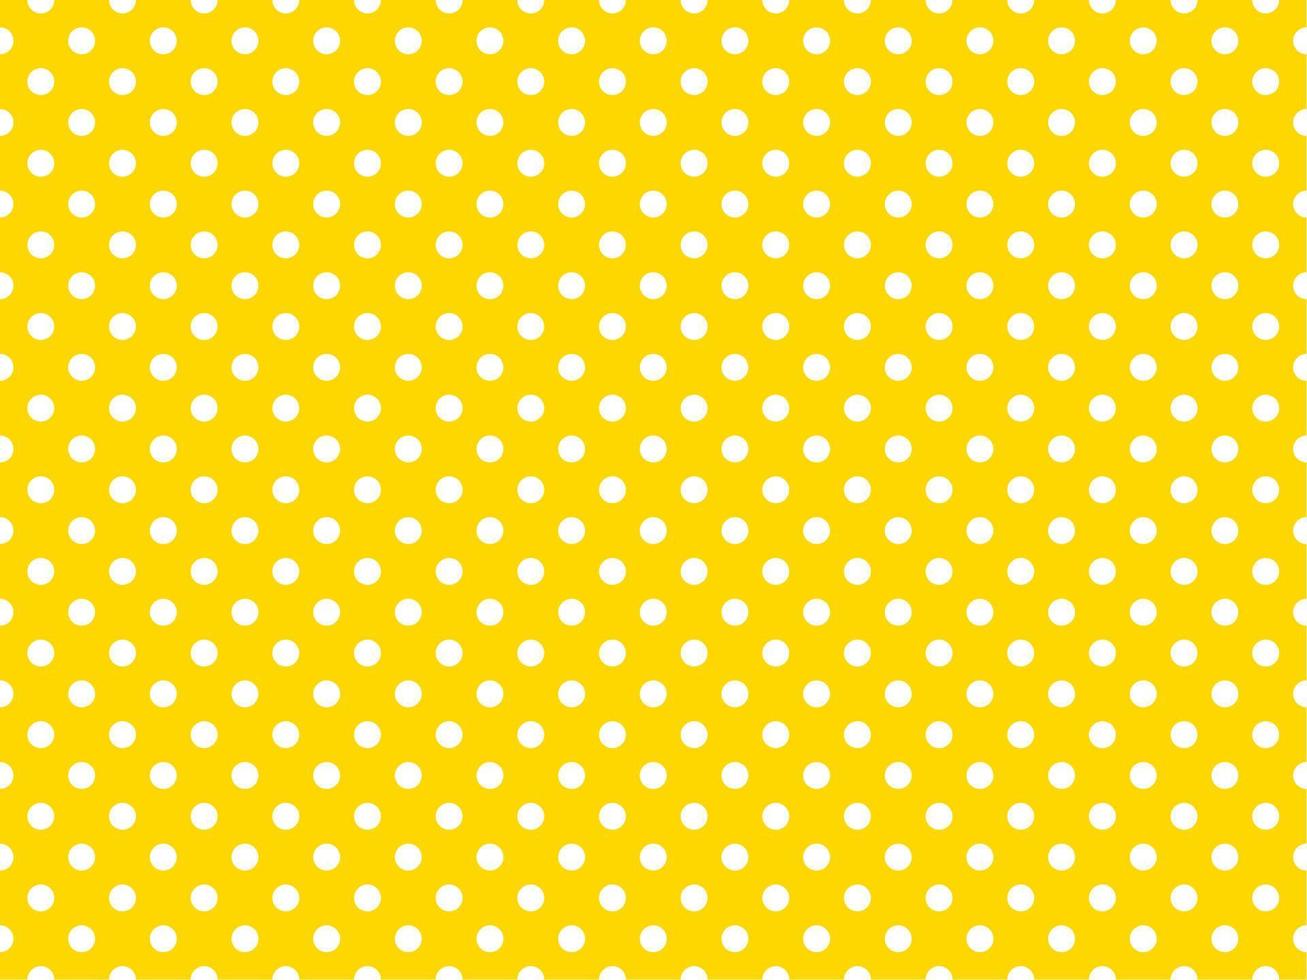 white polka dots over gold background vector